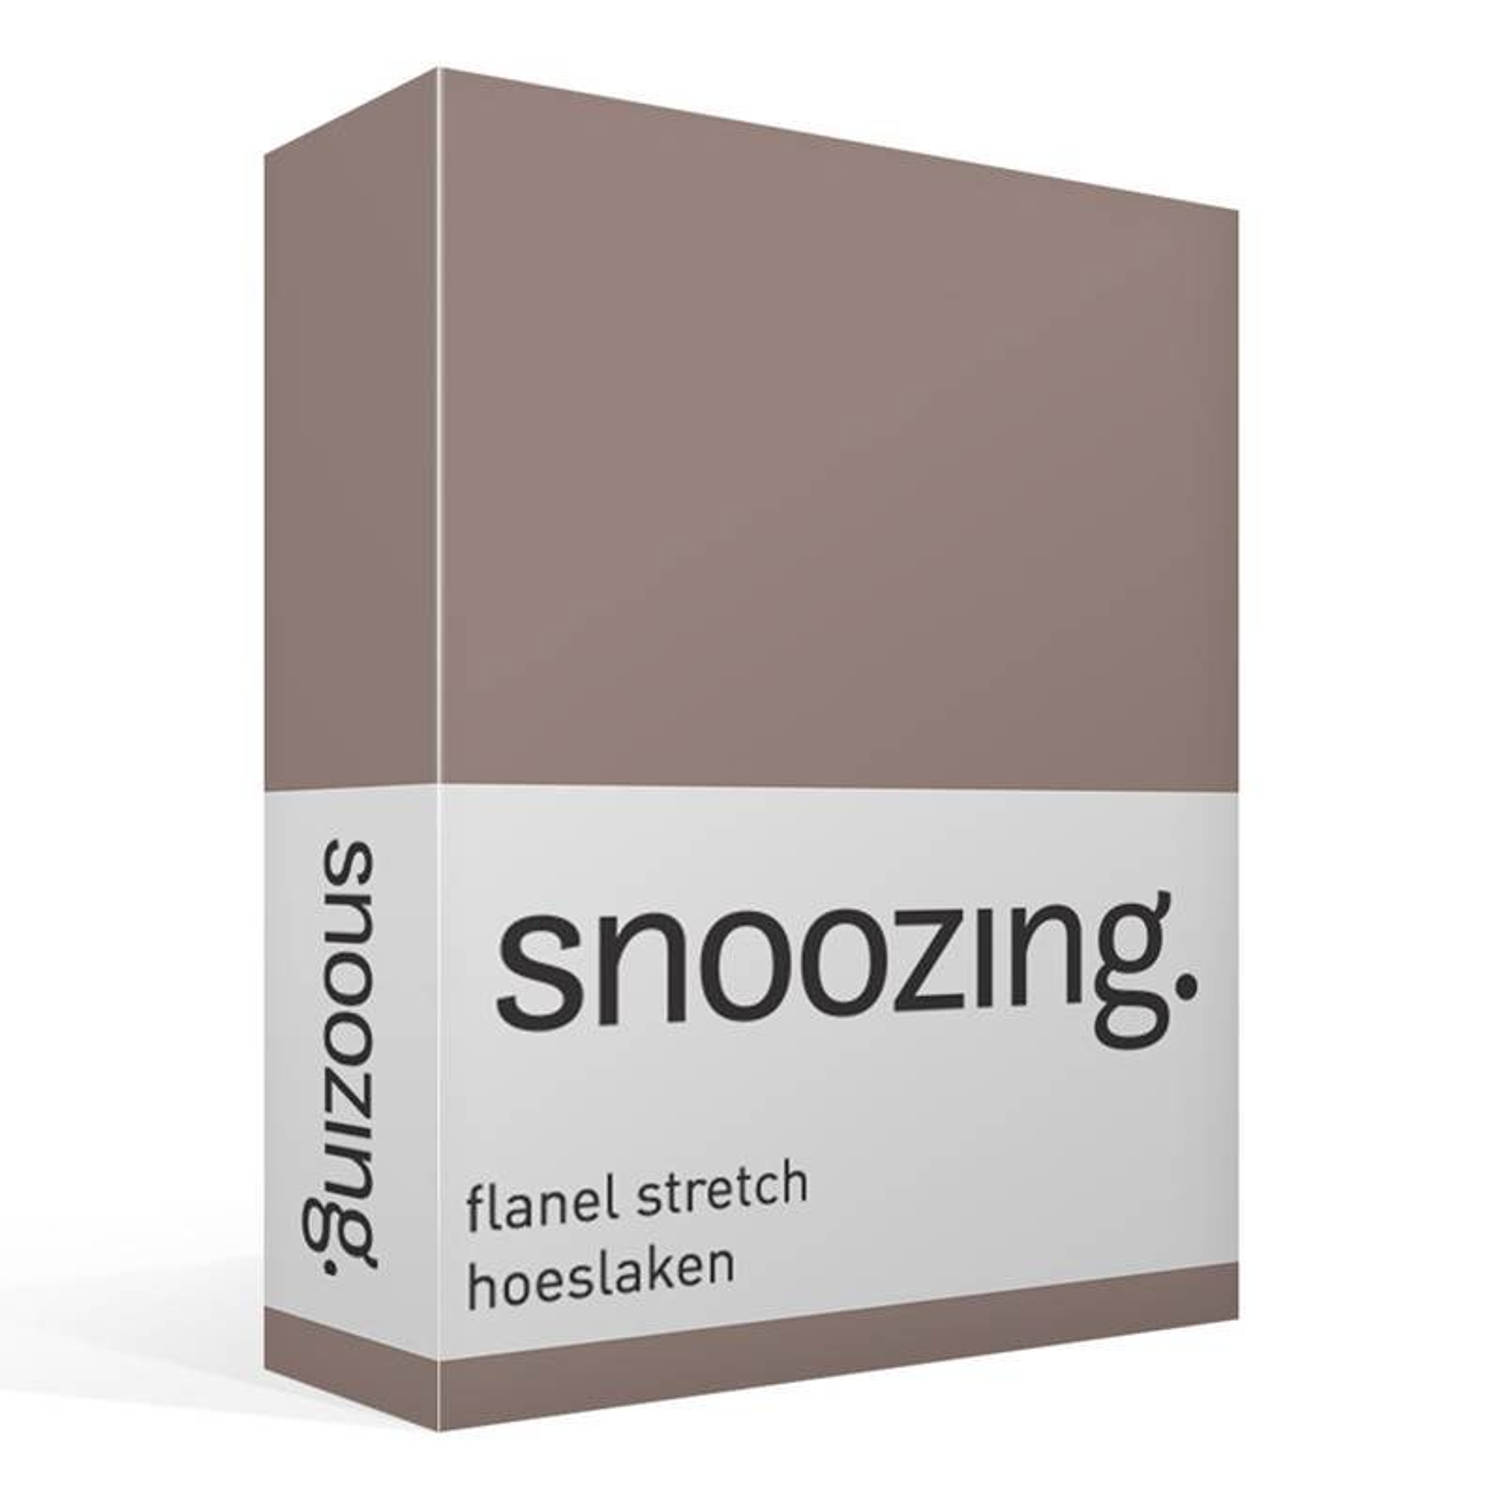 Snoozing stretch flanel hoeslaken - Tweepersoons - Taupe